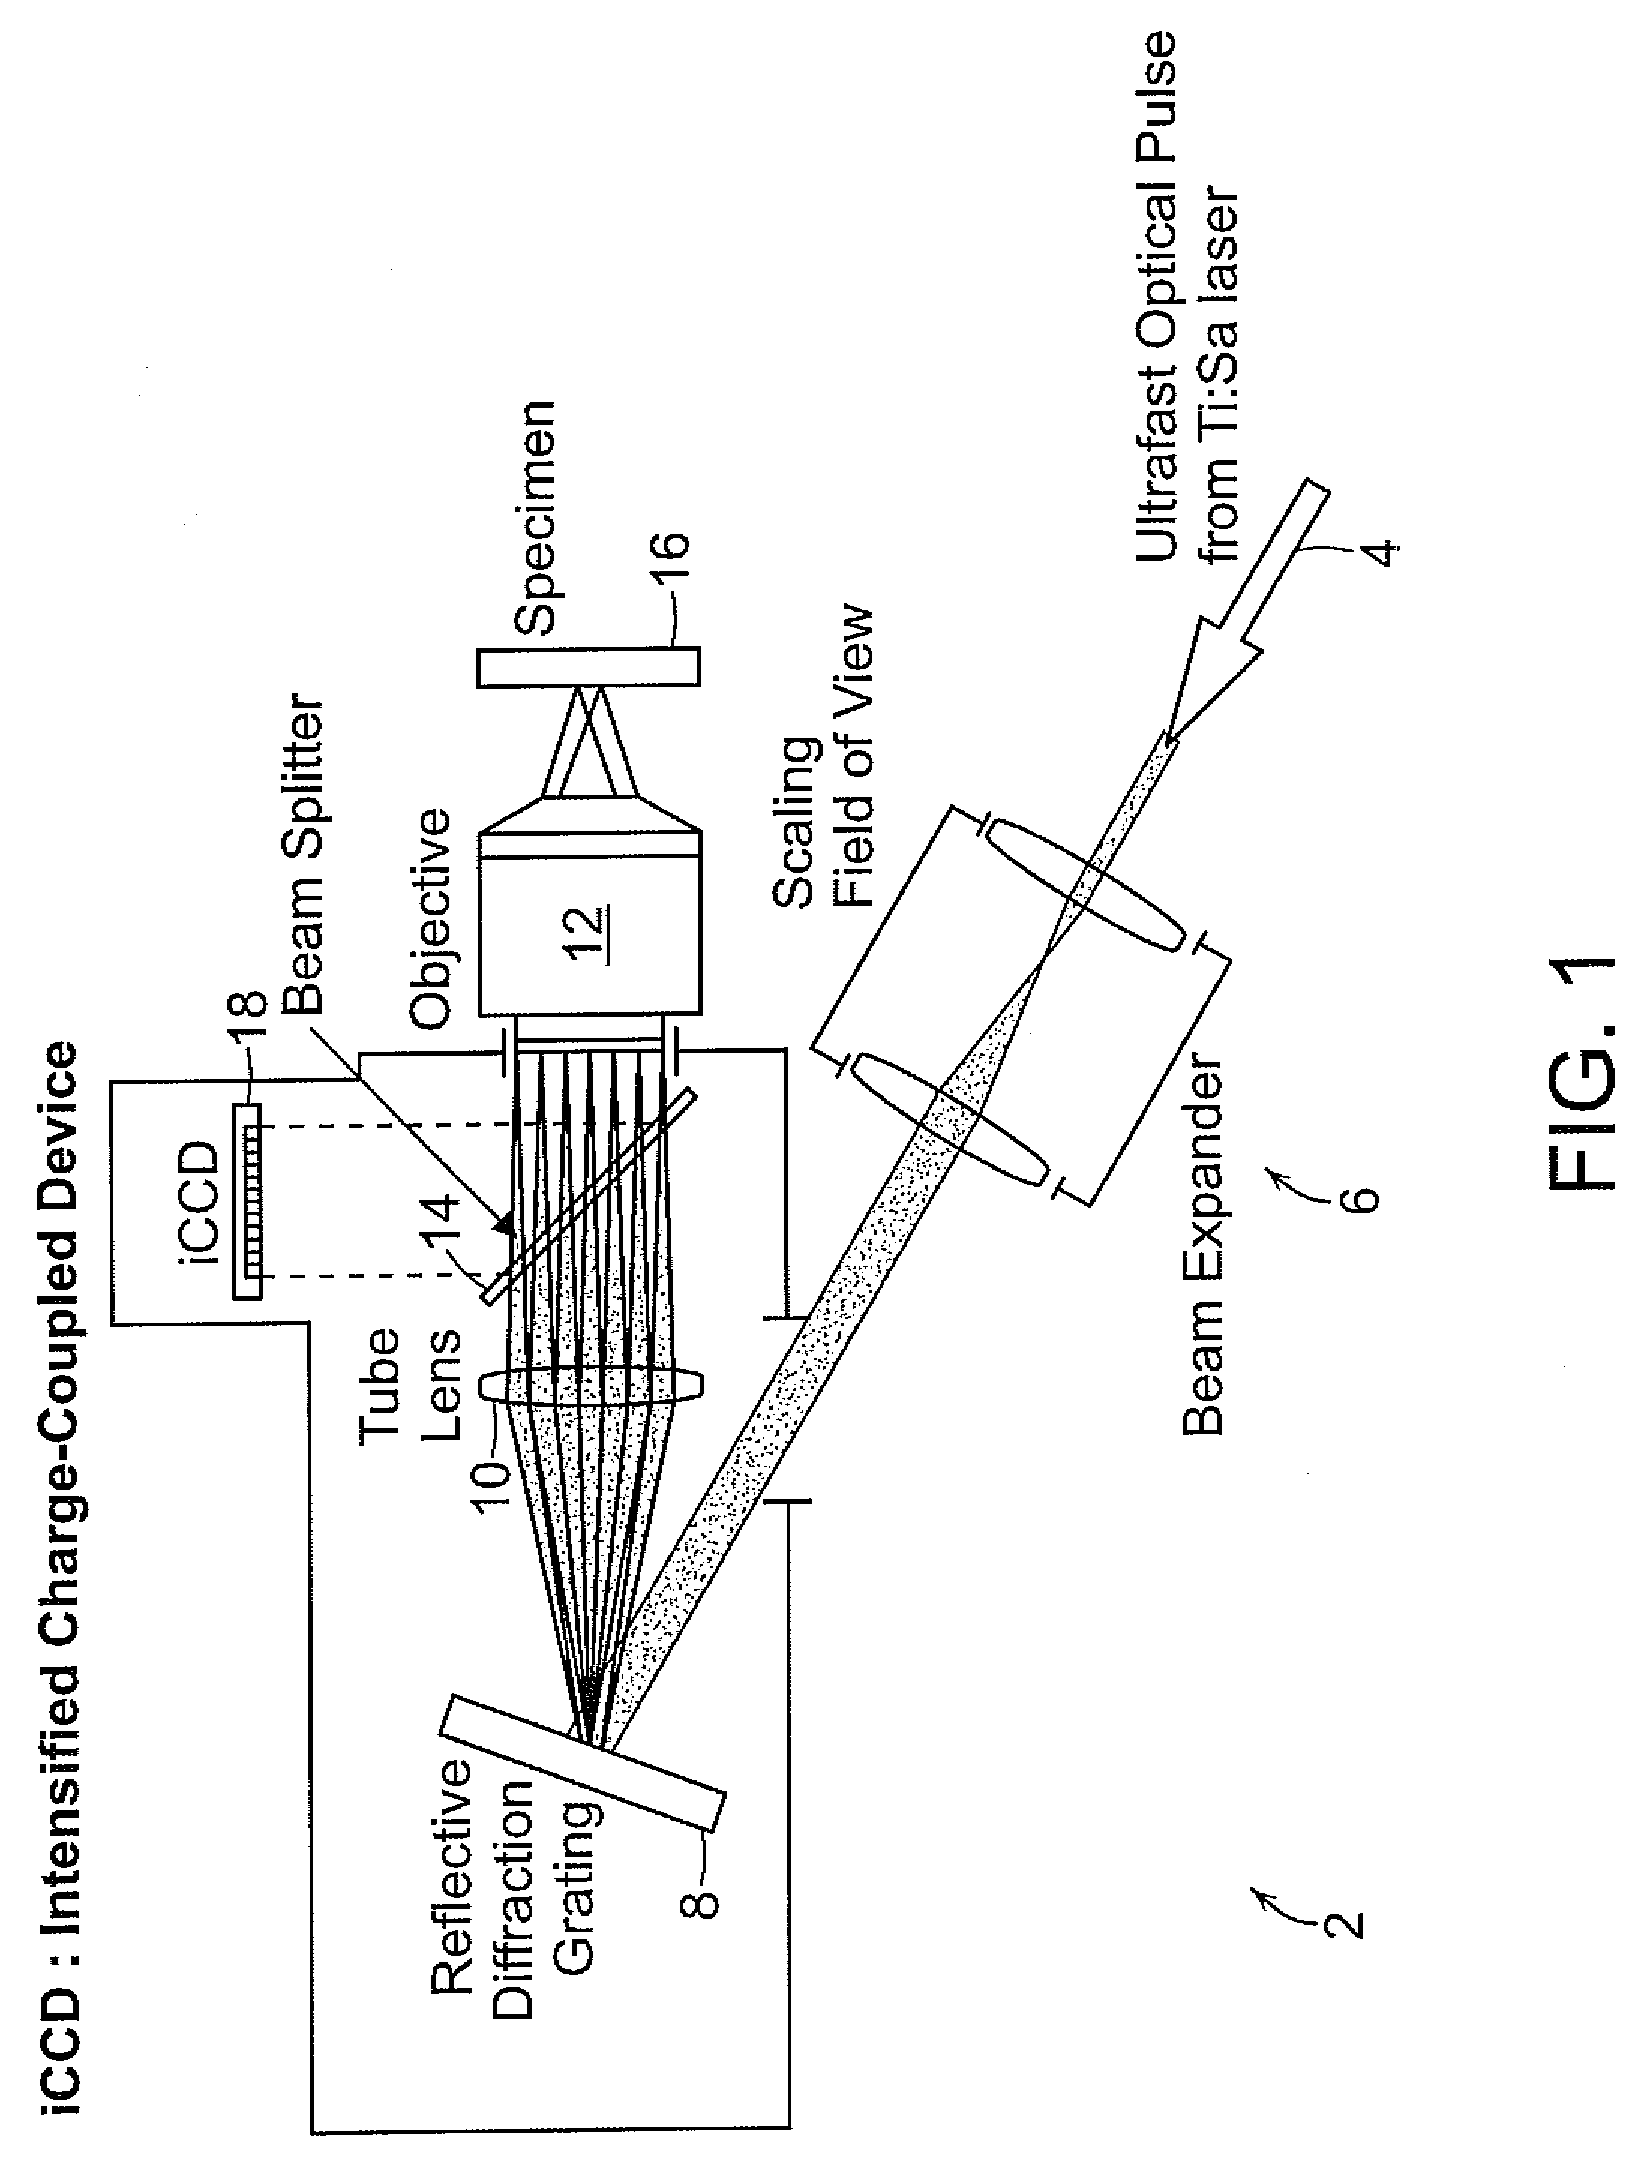 3D two-photon lithographic microfabrication system